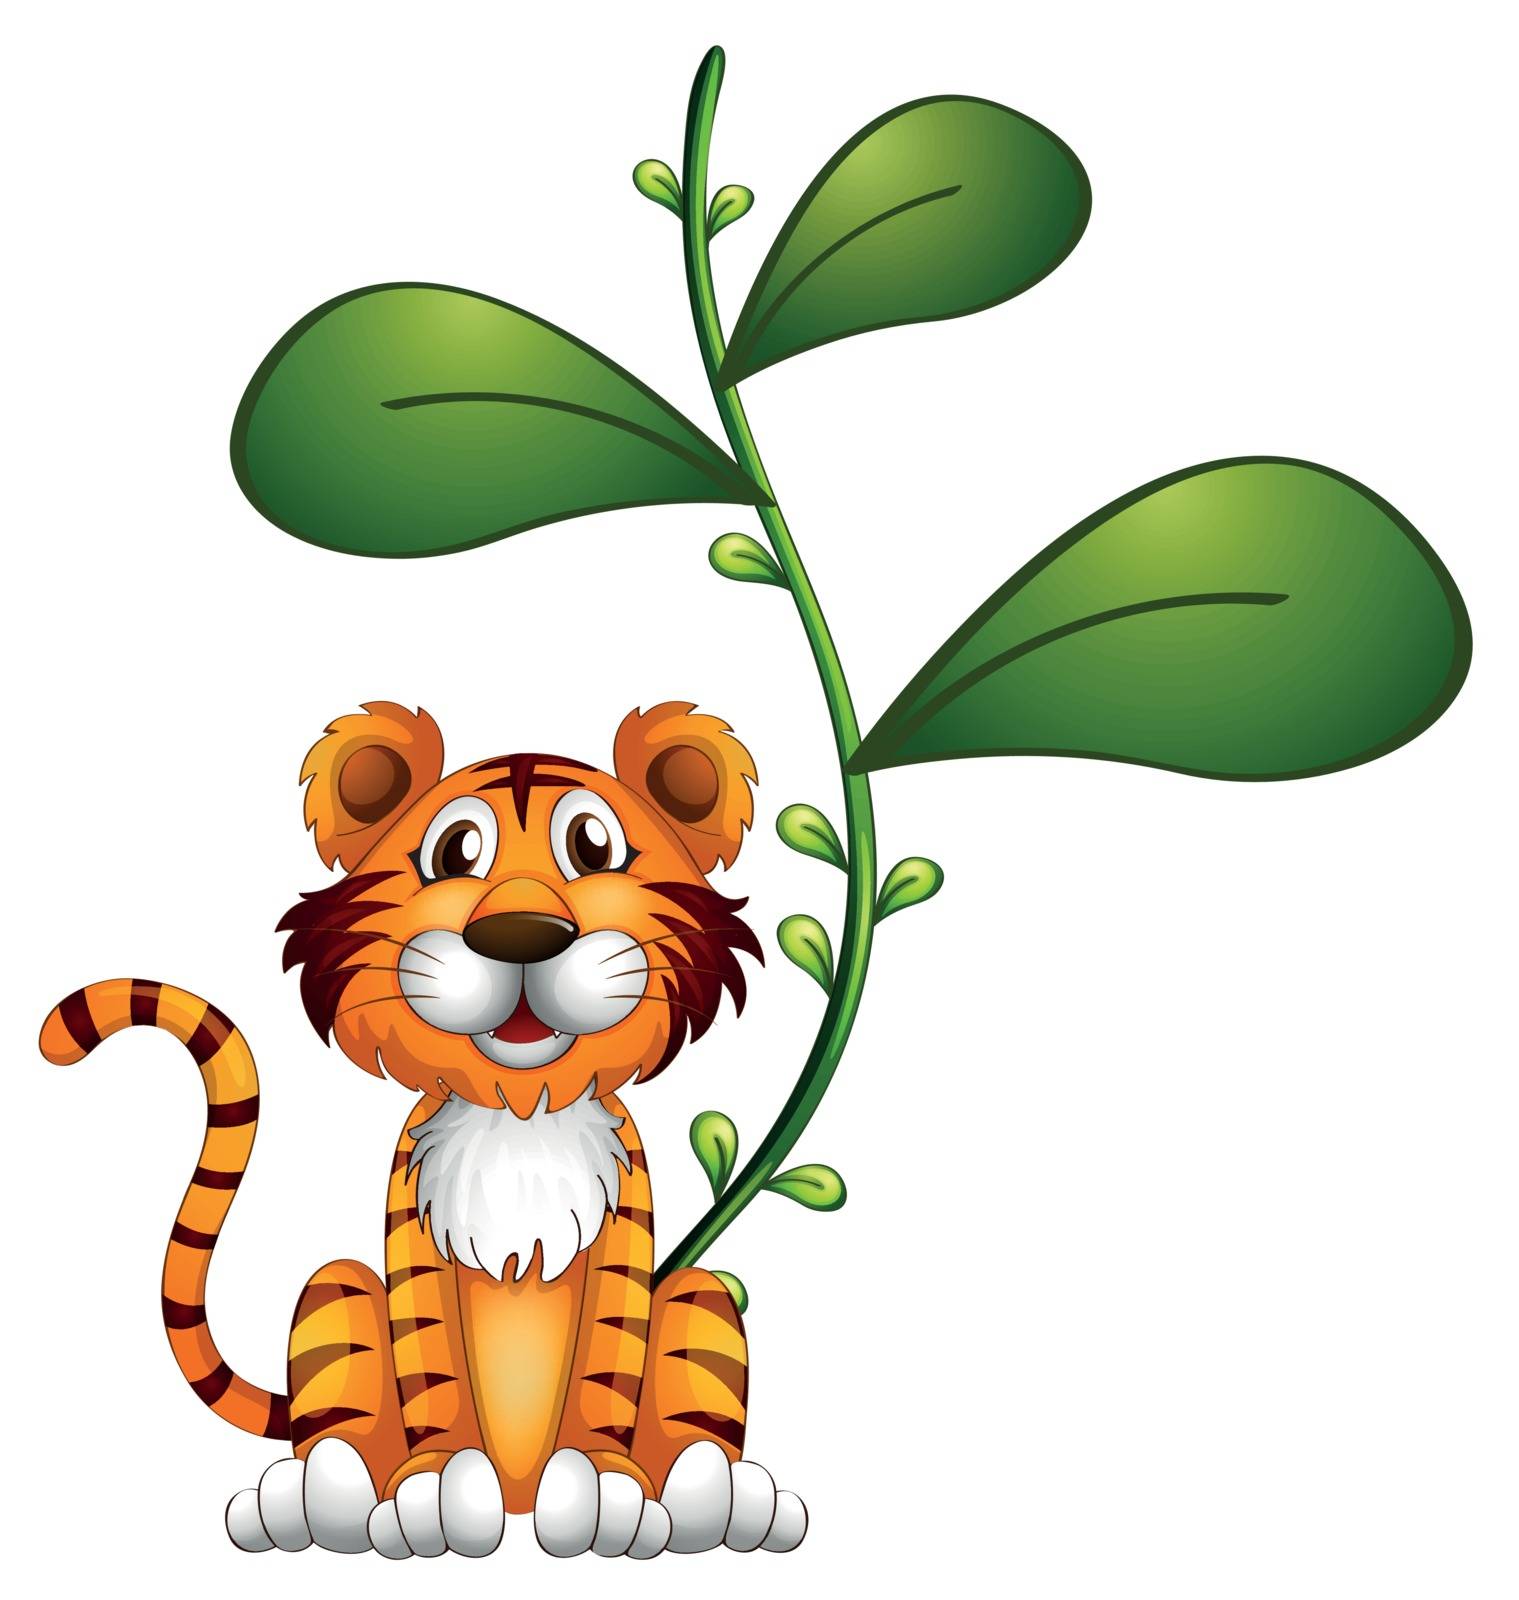 Illustration of a tiger beside a vine on a white background